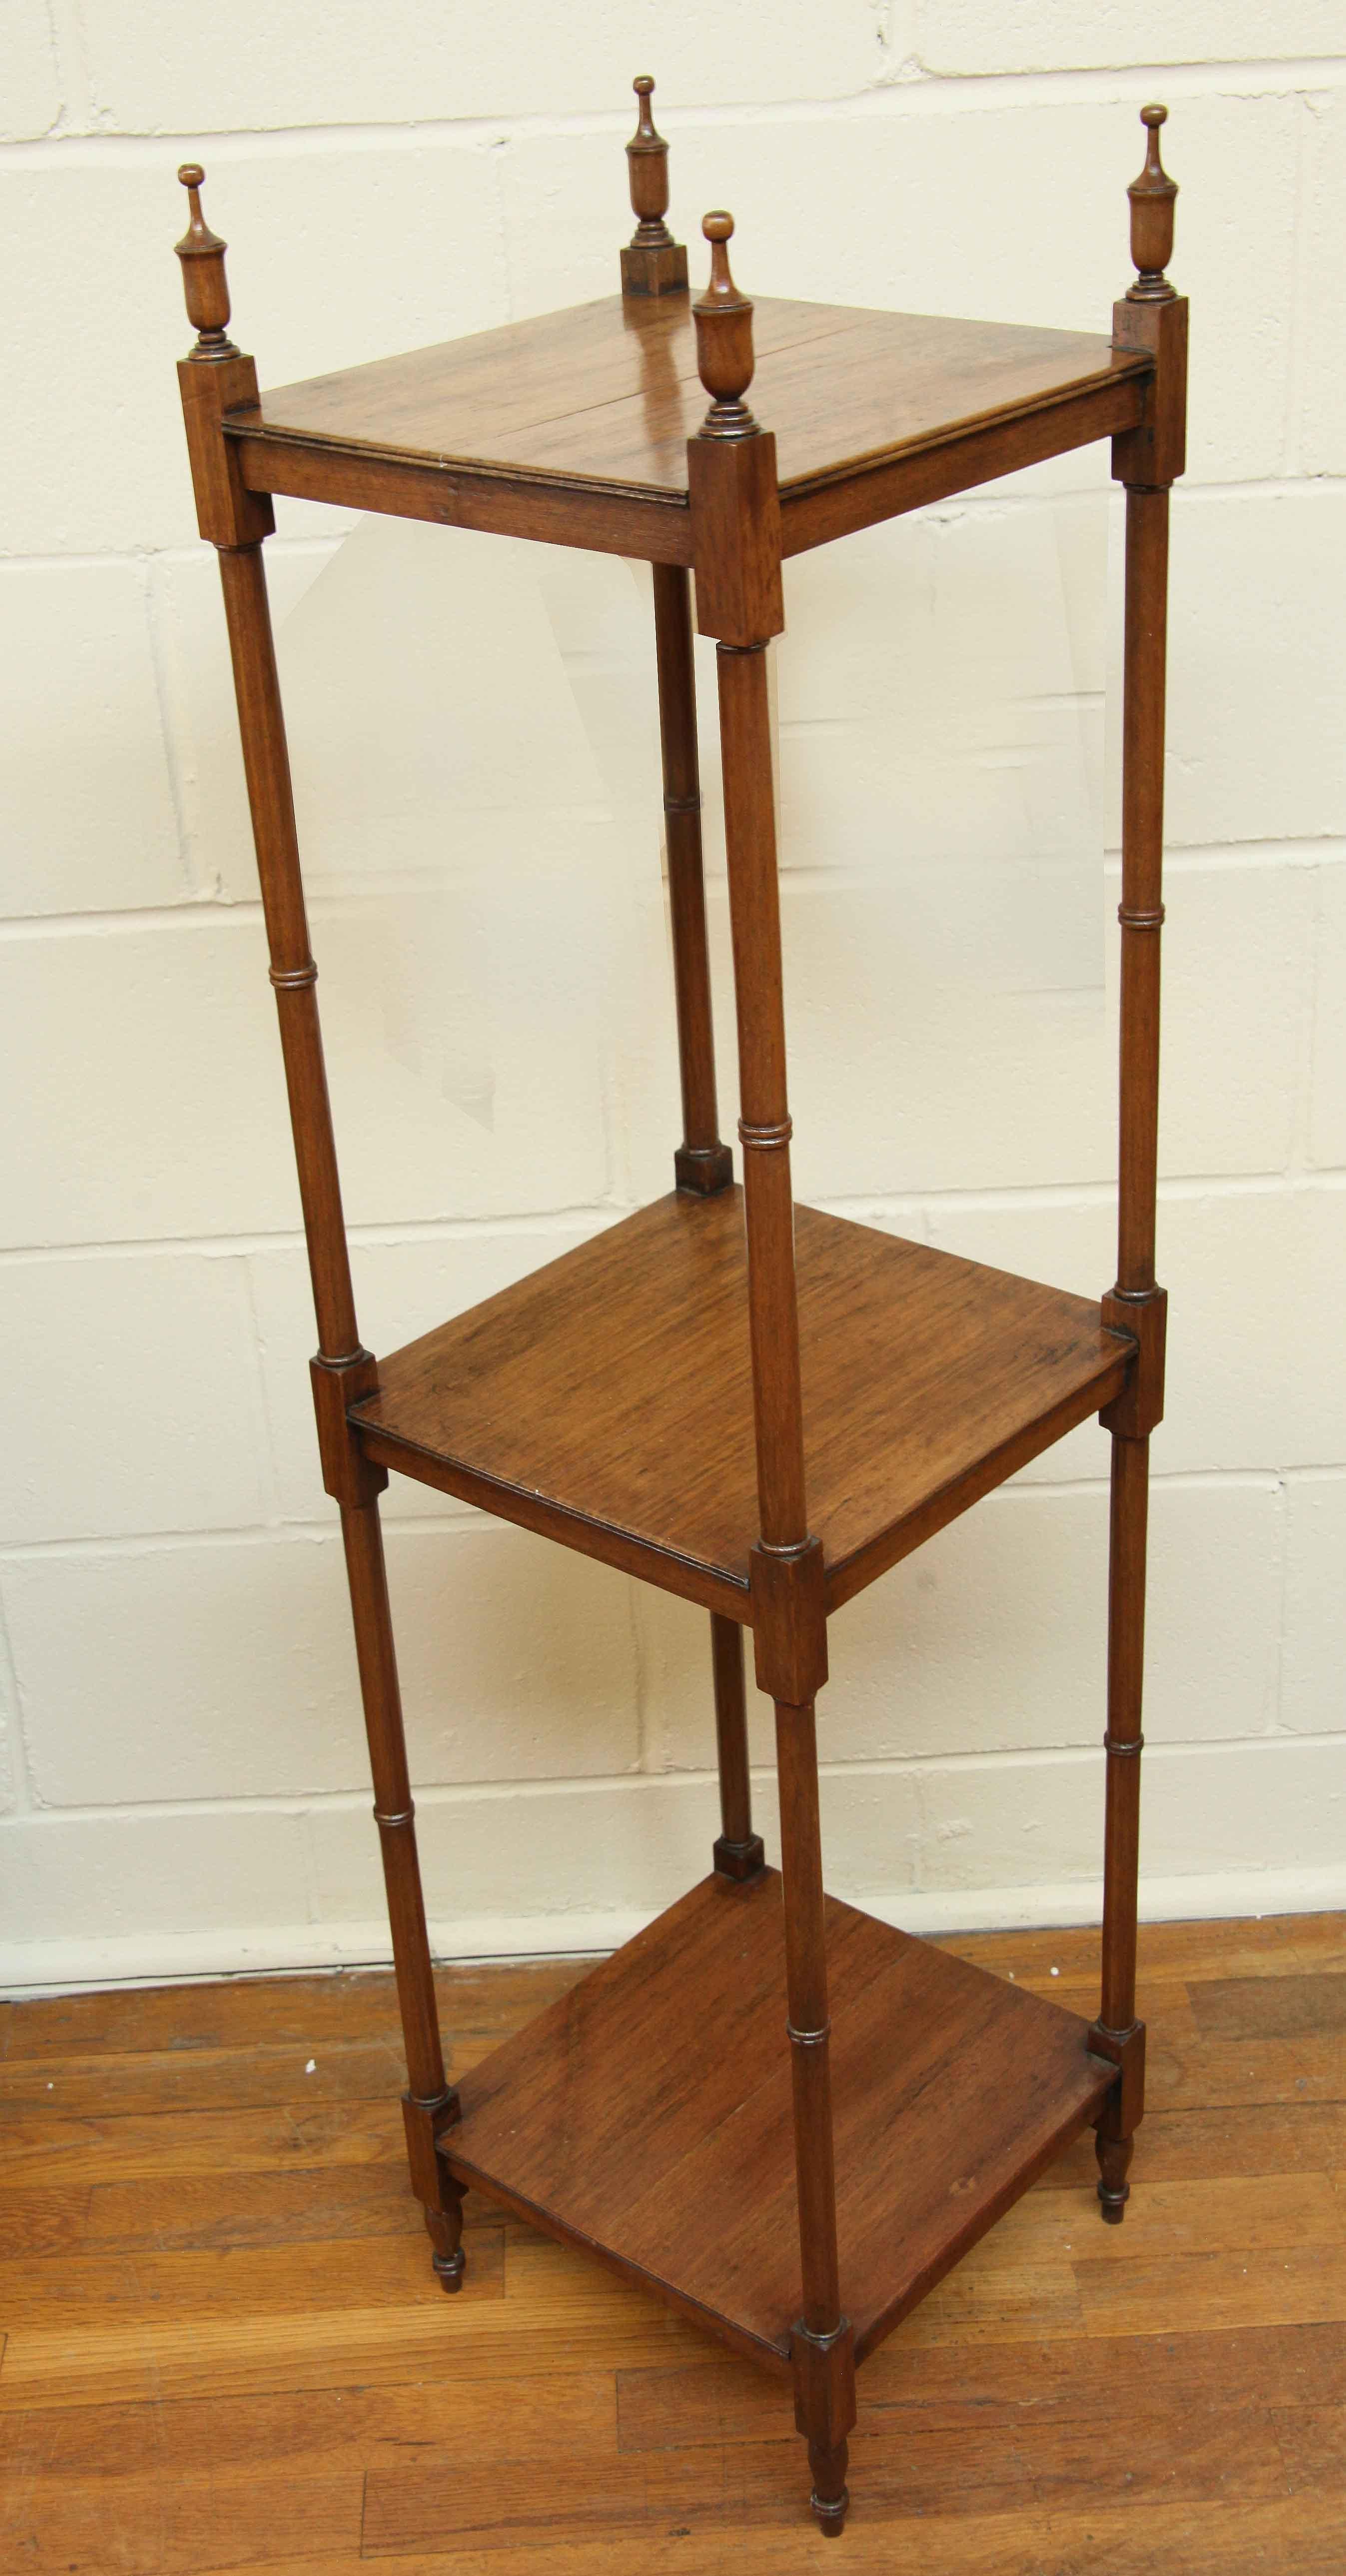 English mahogany three tier etagere,  this square etagere has a beautiful faded color and patina ,  the four corner posts have faux bamboo turnings terminating at the top with baluster shaped finials .  The height to the top of the finials is